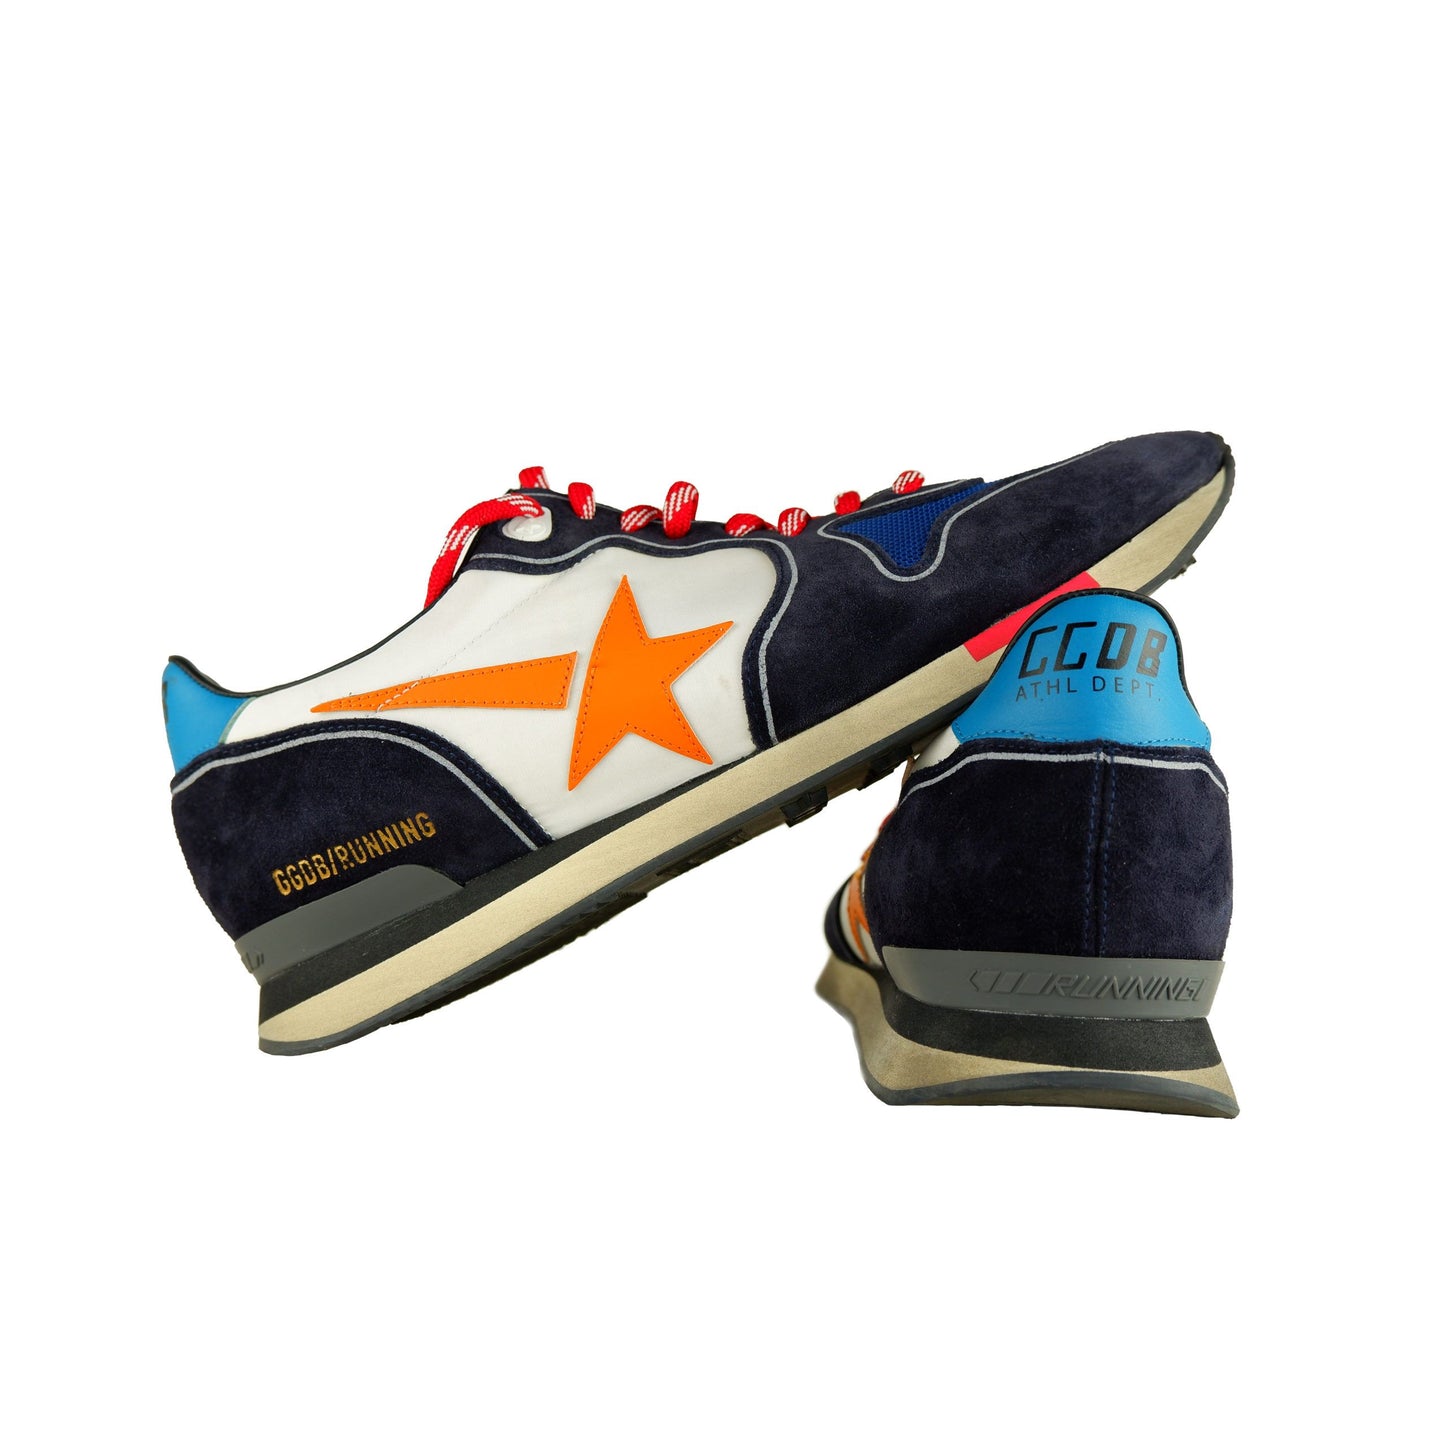 Blue Suede Sneakers with Orange Star Accent